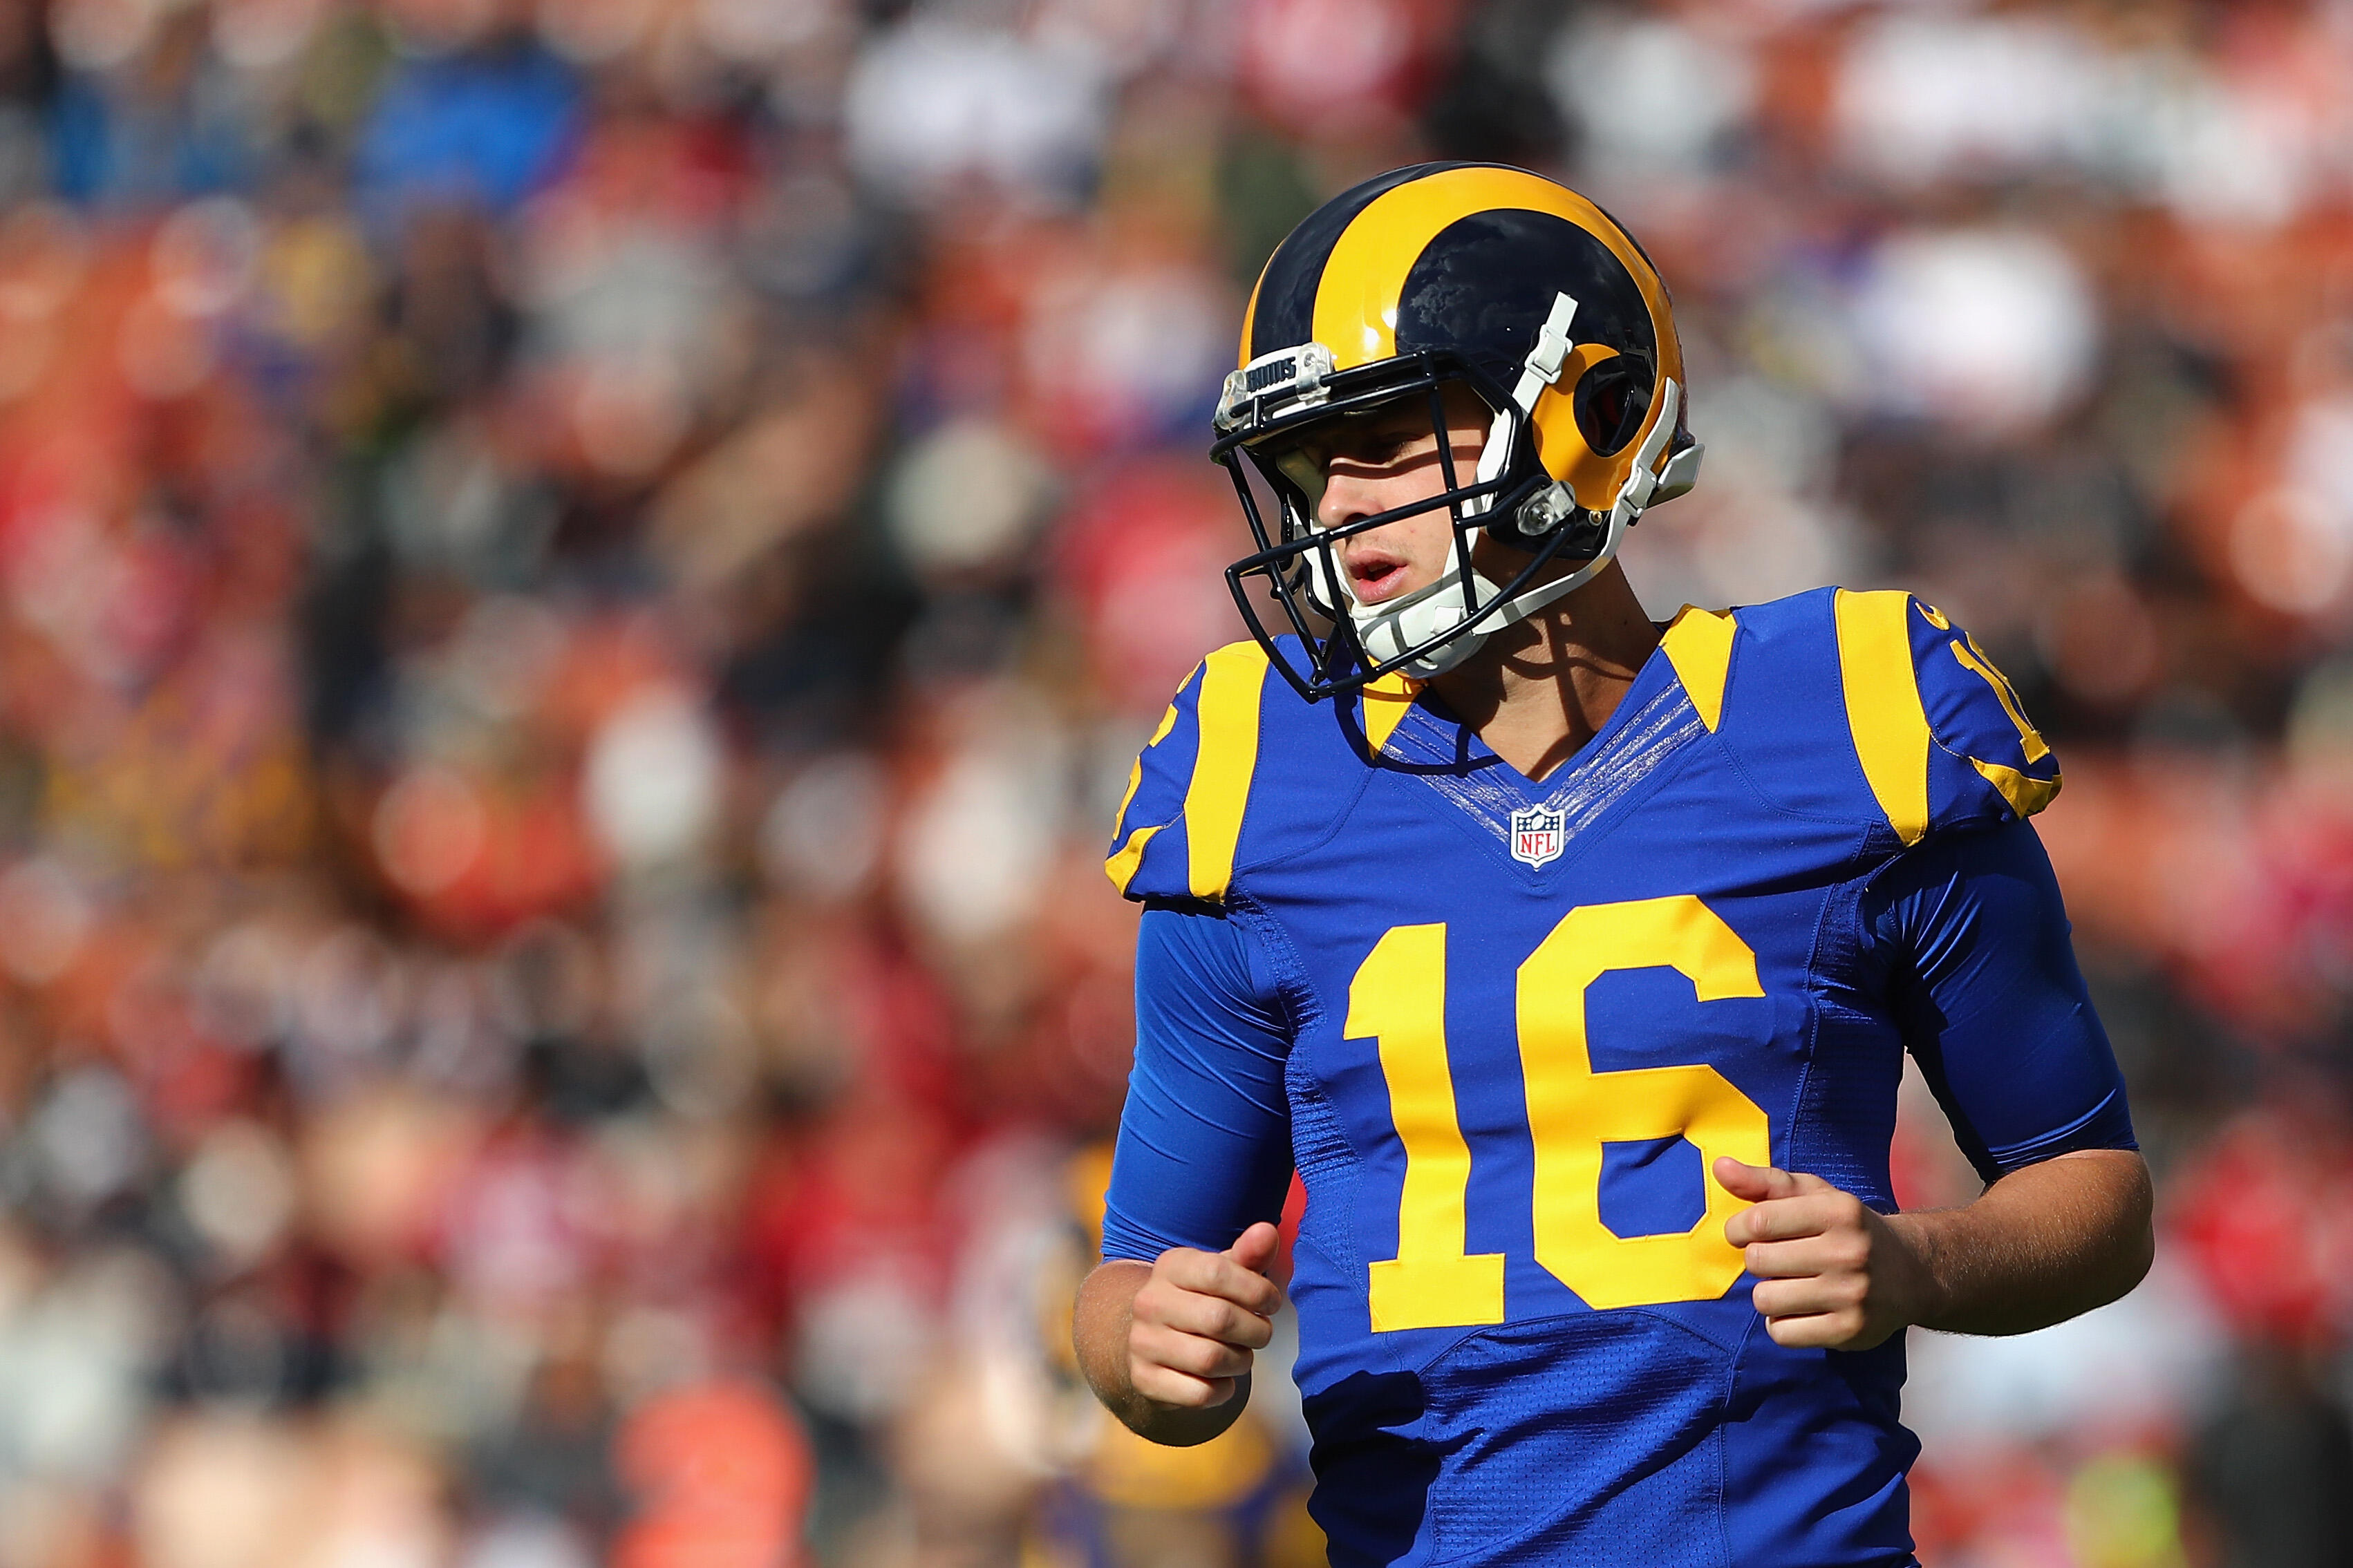 LOS ANGELES, CA - DECEMBER 24:  Jared Goff #16 of the Los Angeles Rams reacts during the game against the San Francisco 49ers at Los Angeles Memorial Coliseum on December 24, 2016 in Los Angeles, California.  (Photo by Tim Bradbury/Getty Images)